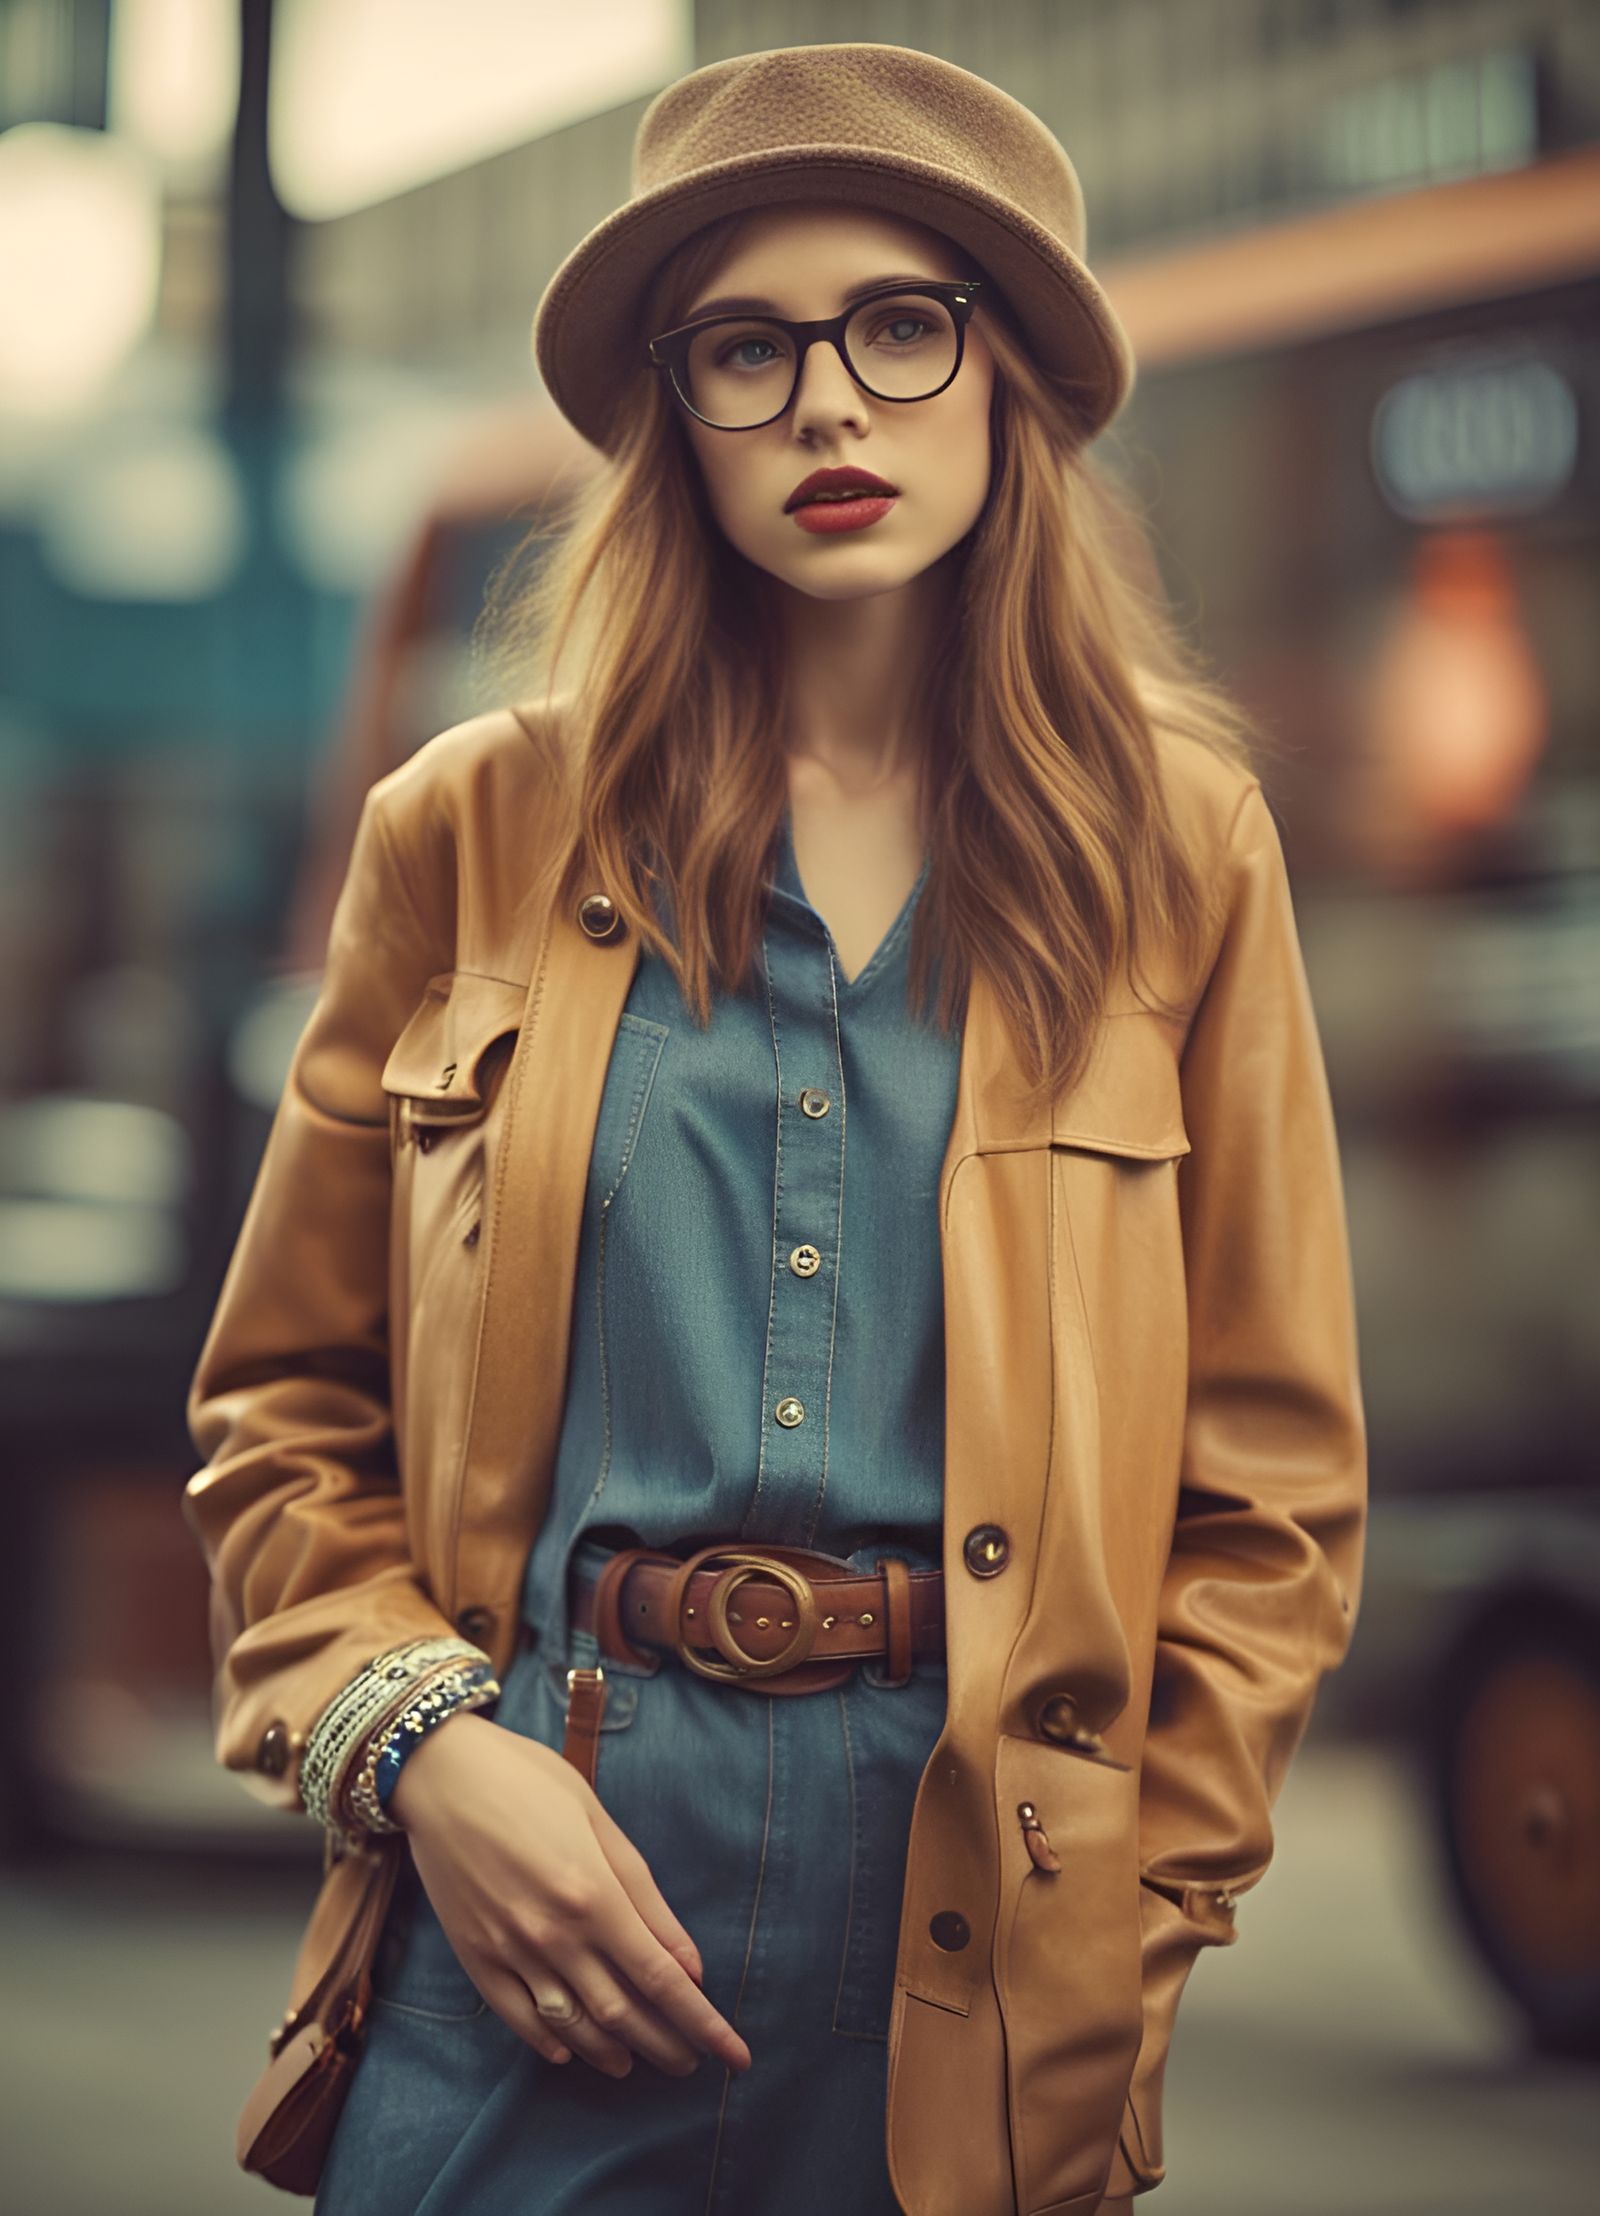 a captivating image of a hipster-style girl exuding a sense of